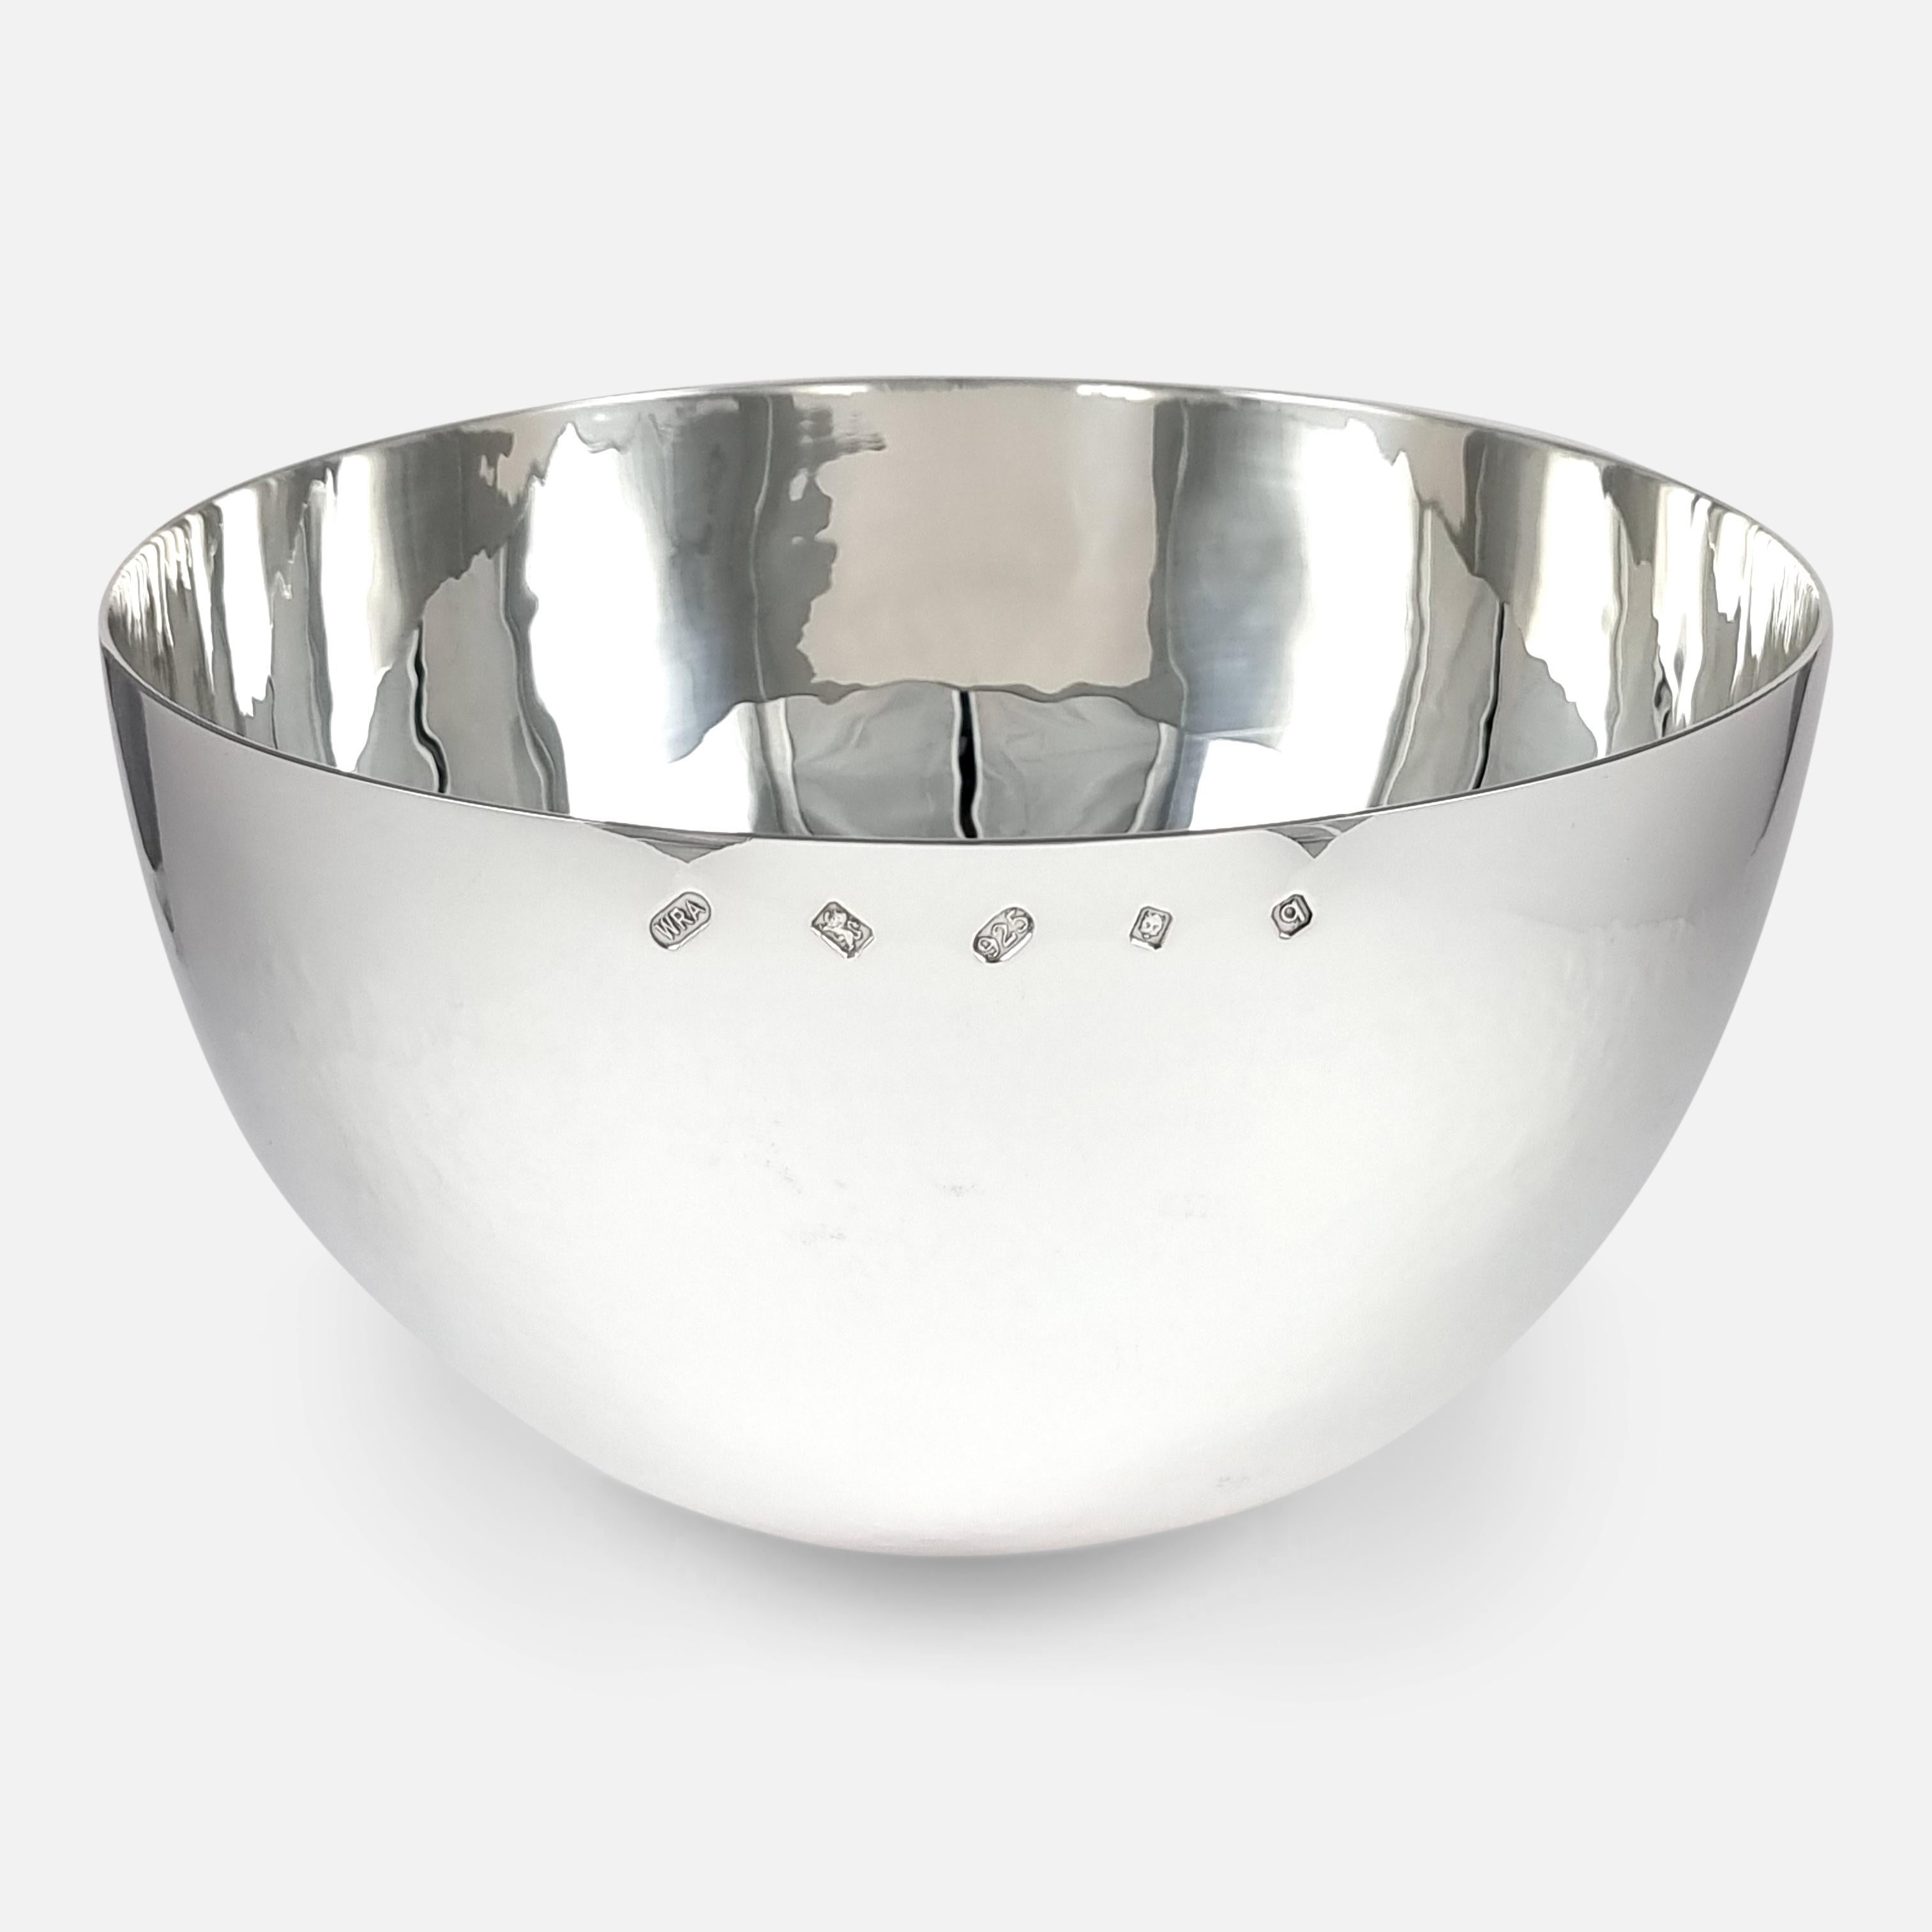 An Elizabeth II sterling silver tumble fruit bowl. The planished silver bowl is crafted in the style of an oversized tumbler cup.

It is hallmarked with the makers mark of William & Son (William Asprey), with London assay office marks, and date